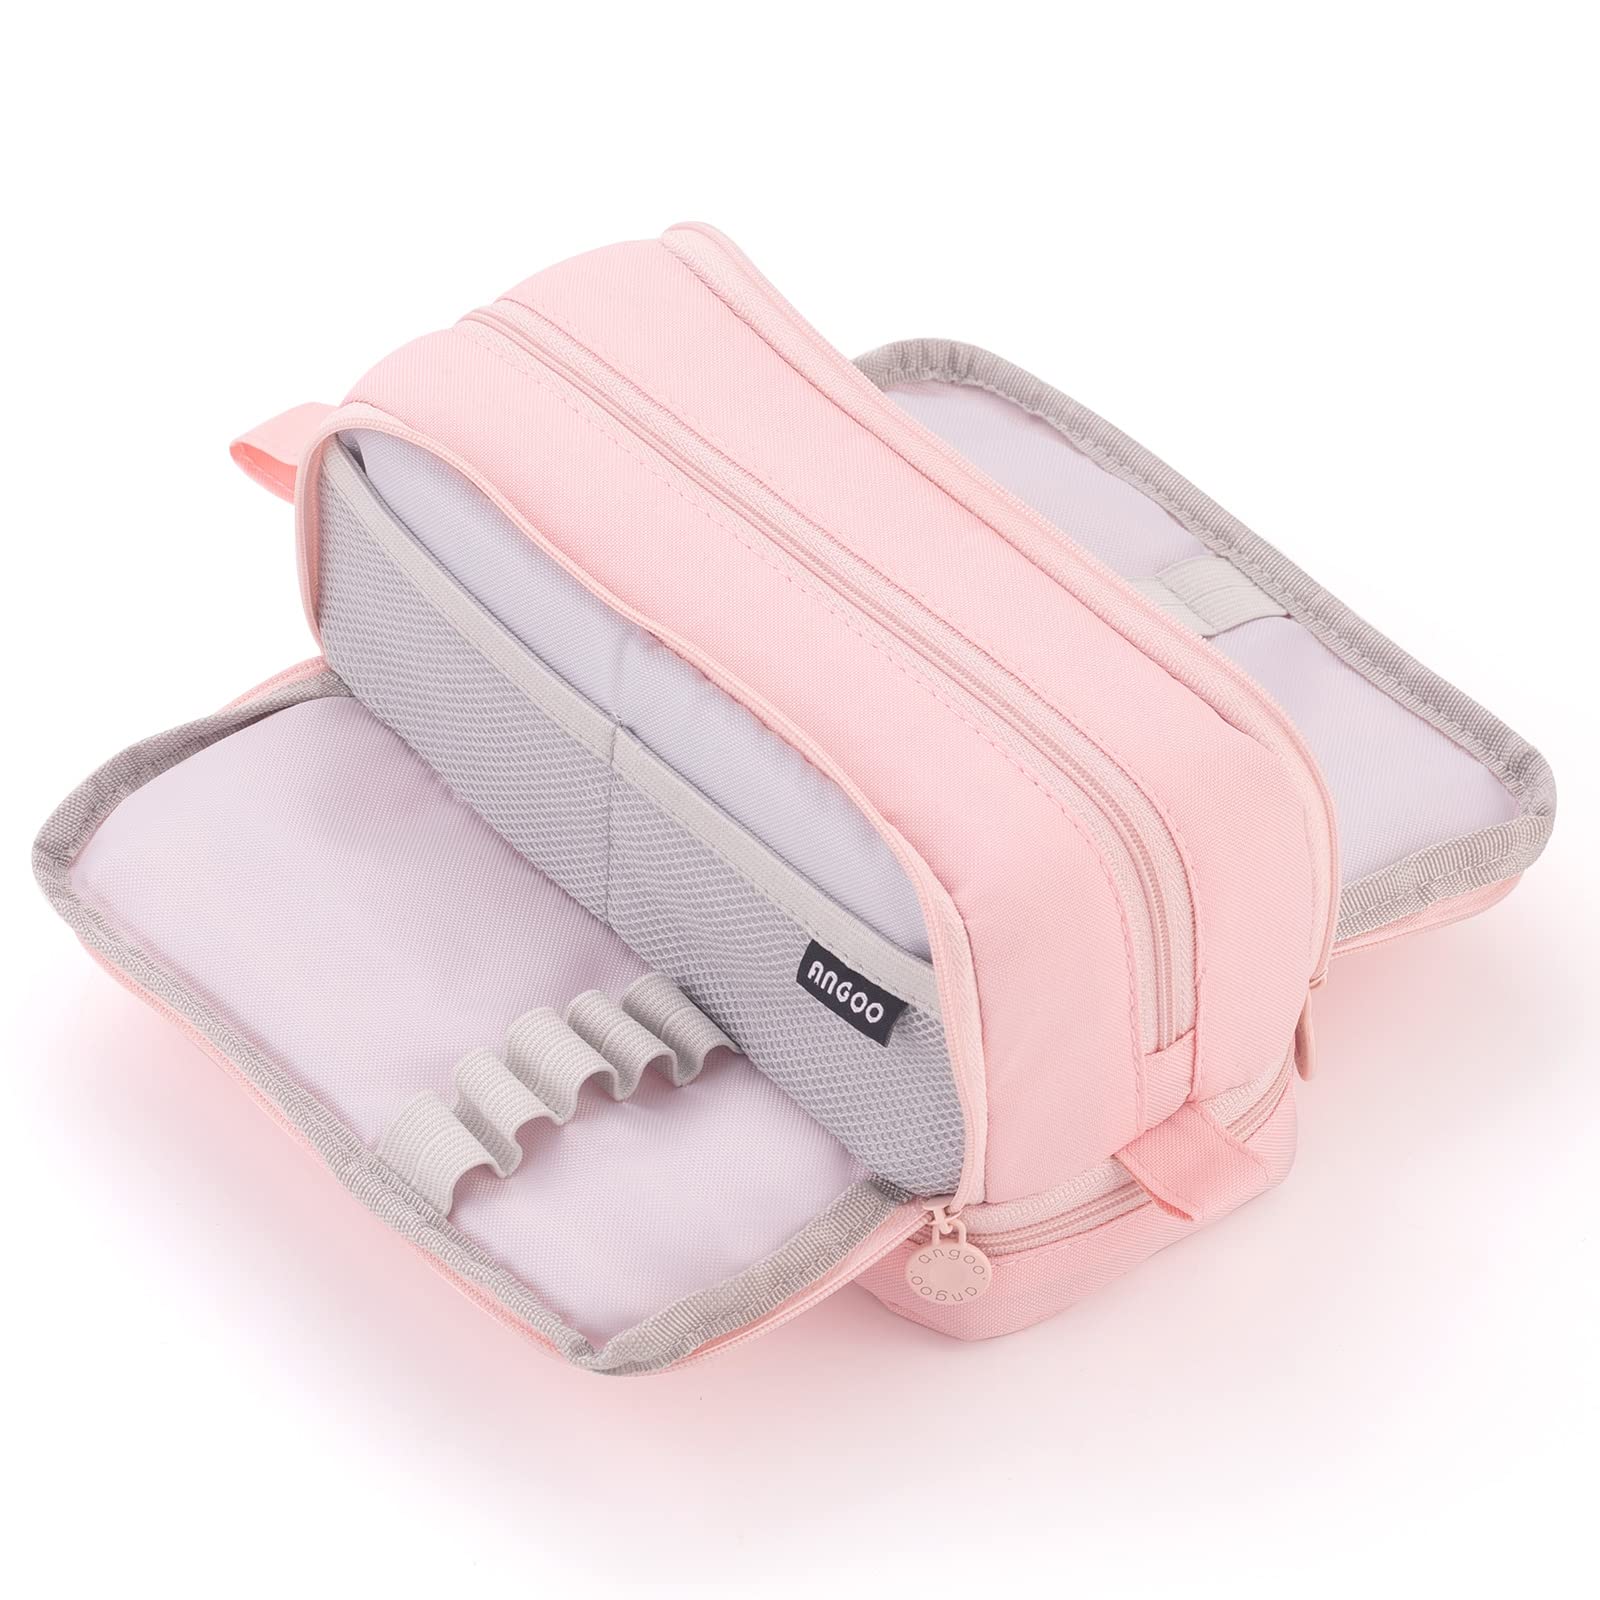 Qips Multi Utility Pencil Box Pouch with Compartments White Online in  India, Buy at Best Price from Firstcry.com - 14964530